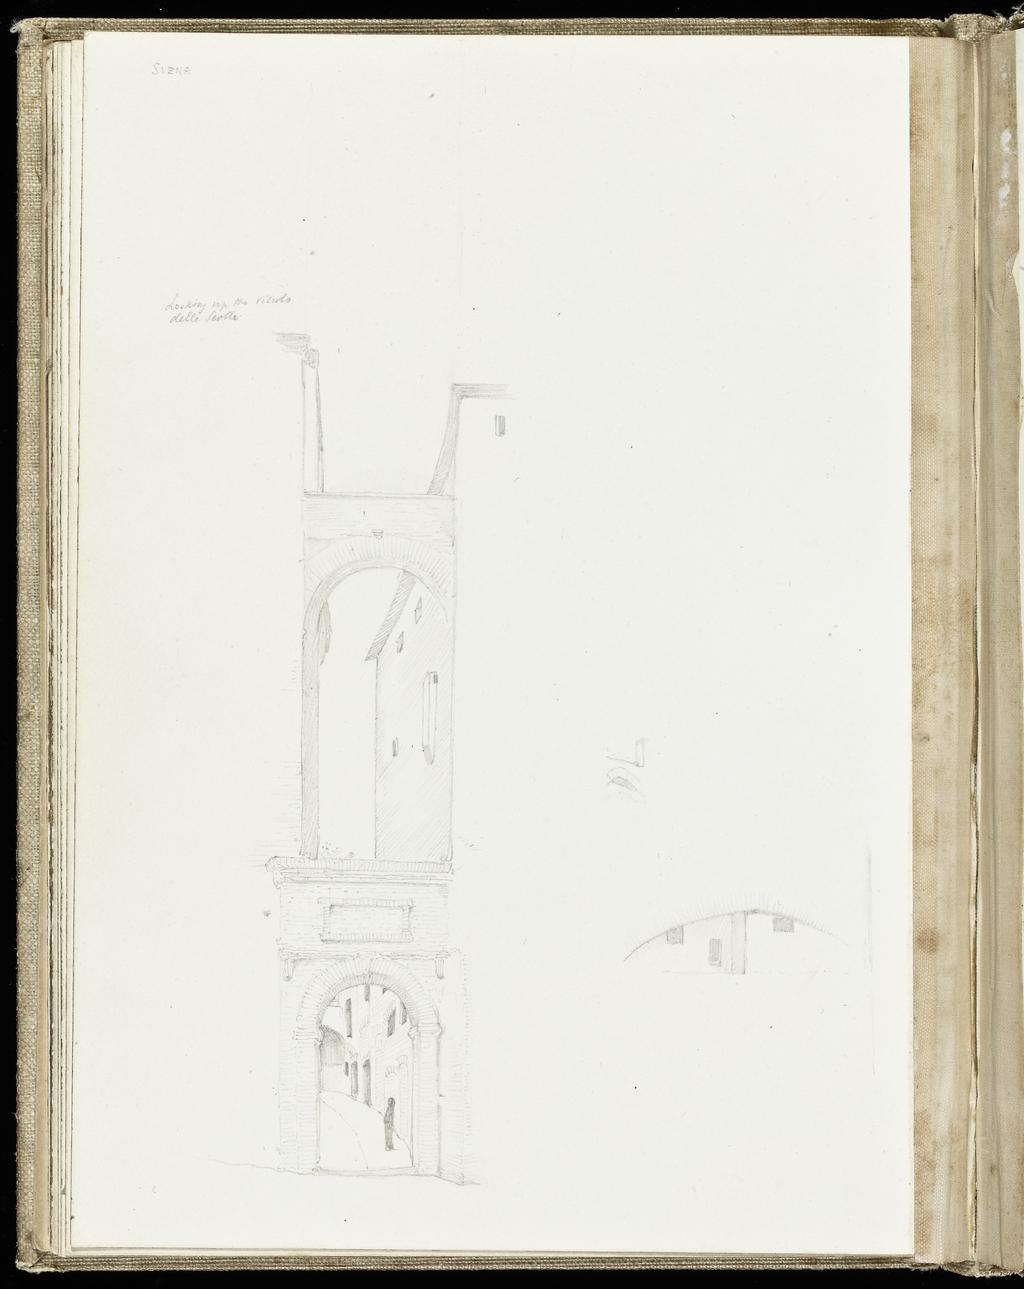 An image of Sketchbook. Recto: View along a city street with several figures. Verso: Left, city street as seen through a double archway; lower right, windows of a building seen through an archway. Burne-Jones, Edward (British, 1833-1898). Coverboards covered with white linen. Front cover has horizontal slits at the upper and lower right sides. Off-white paper. Collocation: each sheet is separately taped to the binding; there are 28ff and a single beige sheet on either side of these. Front and back leaves are blank, recto and verso. Height, sheet size, 179 mm, width, sheet size, 254, mm, 1873.